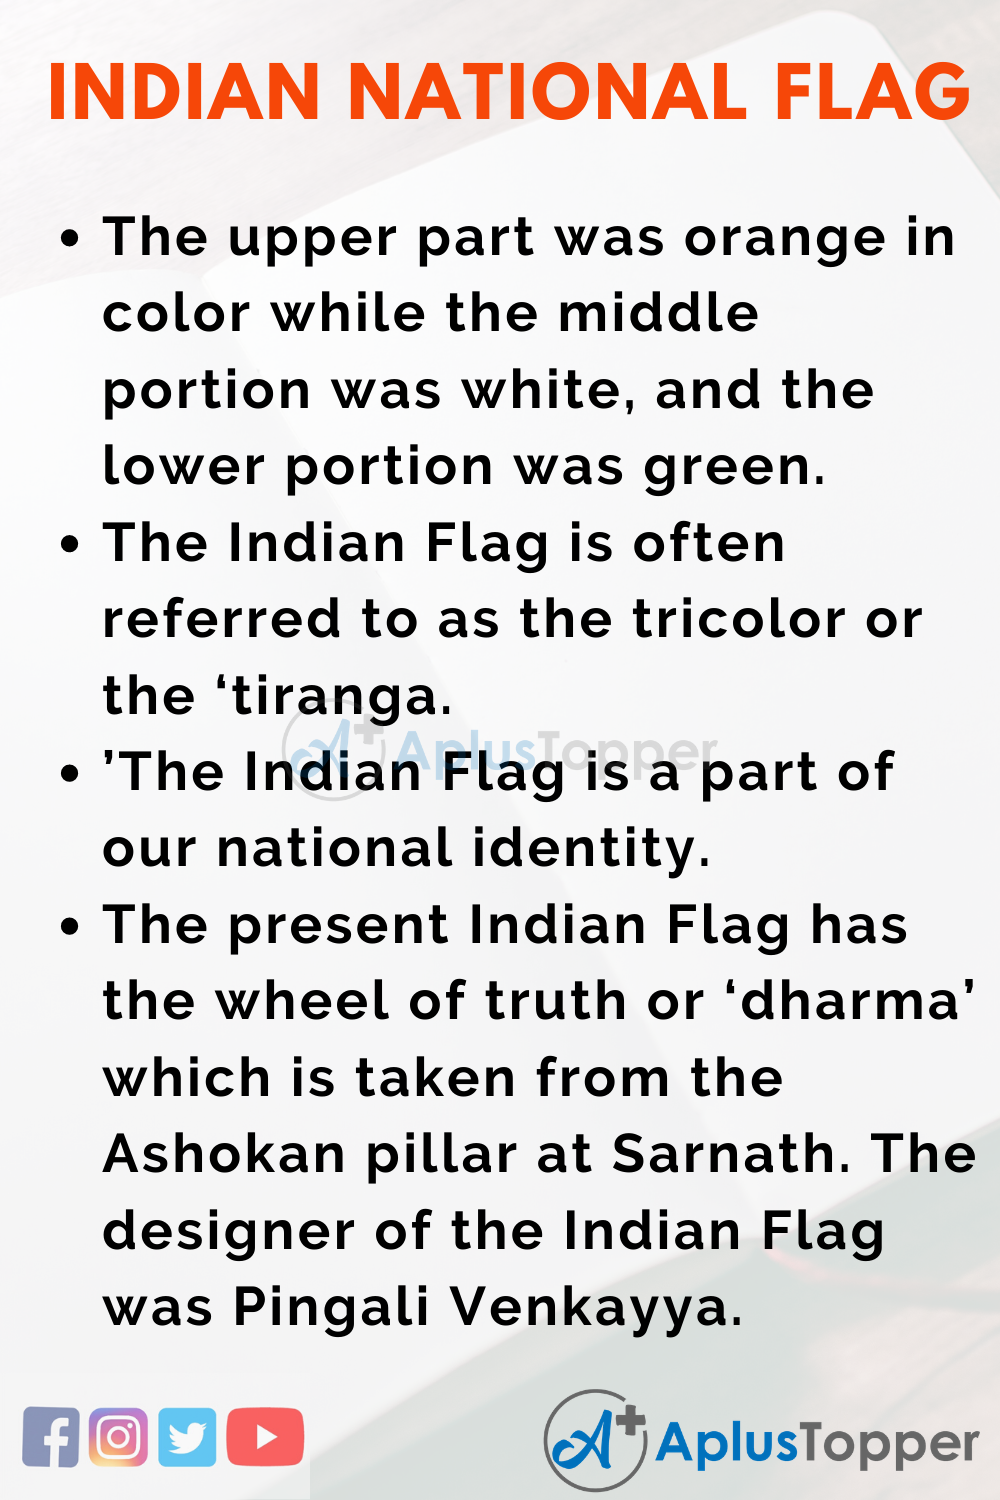 essay about national flag